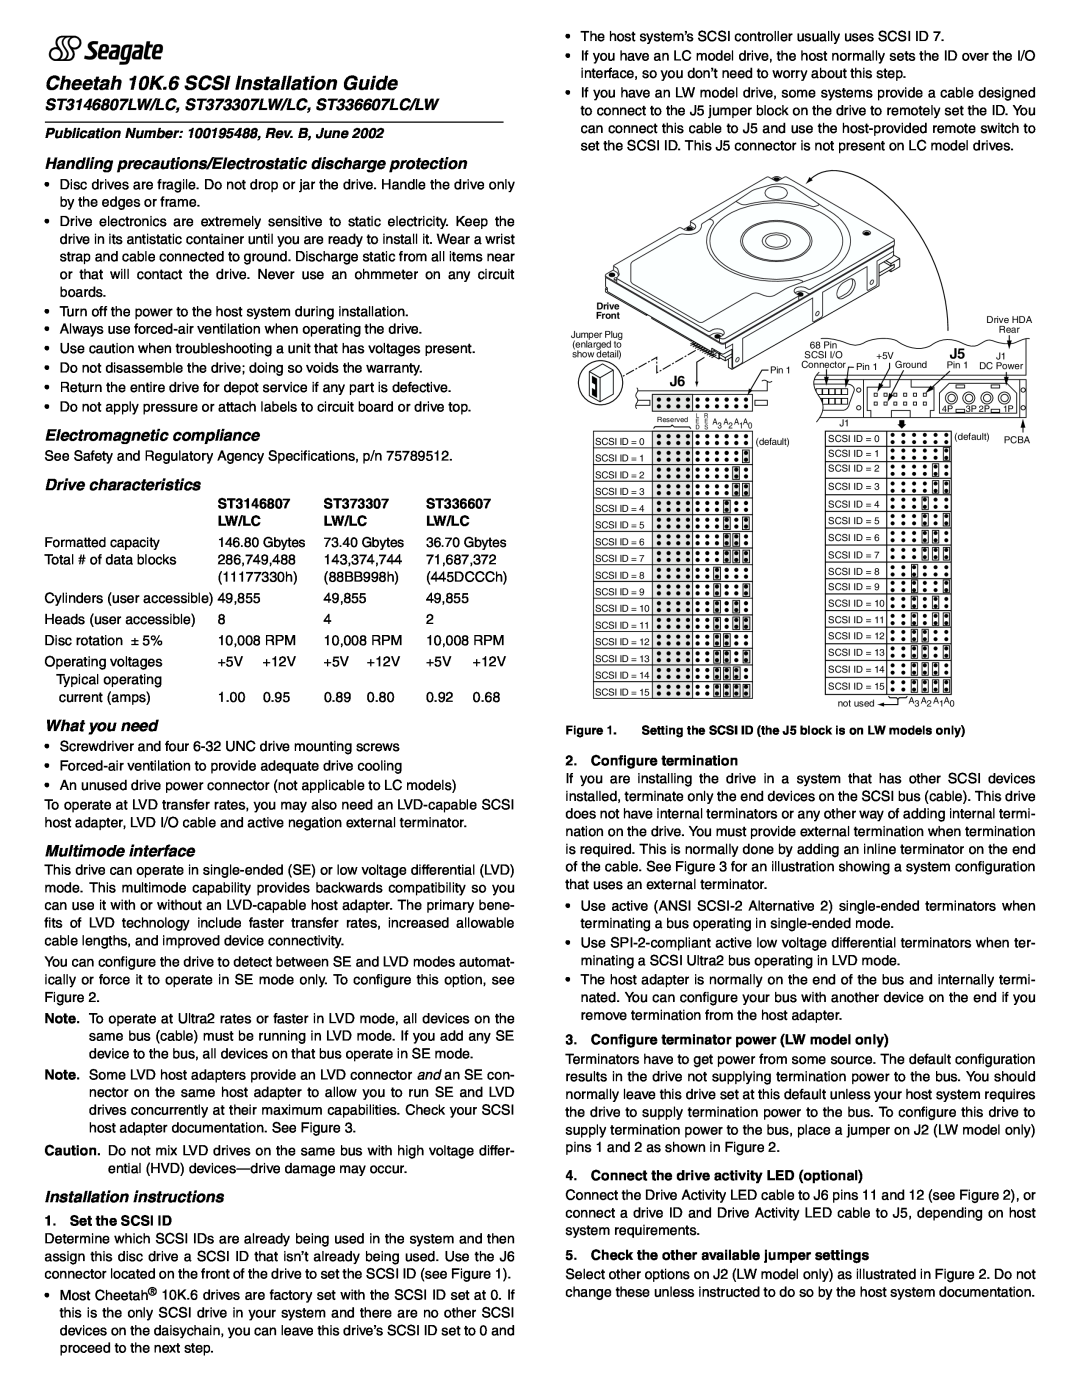 Seagate installation instructions ST3146807LW/LC, ST373307LW/LC, ST336607LC/LW, Electromagnetic compliance 